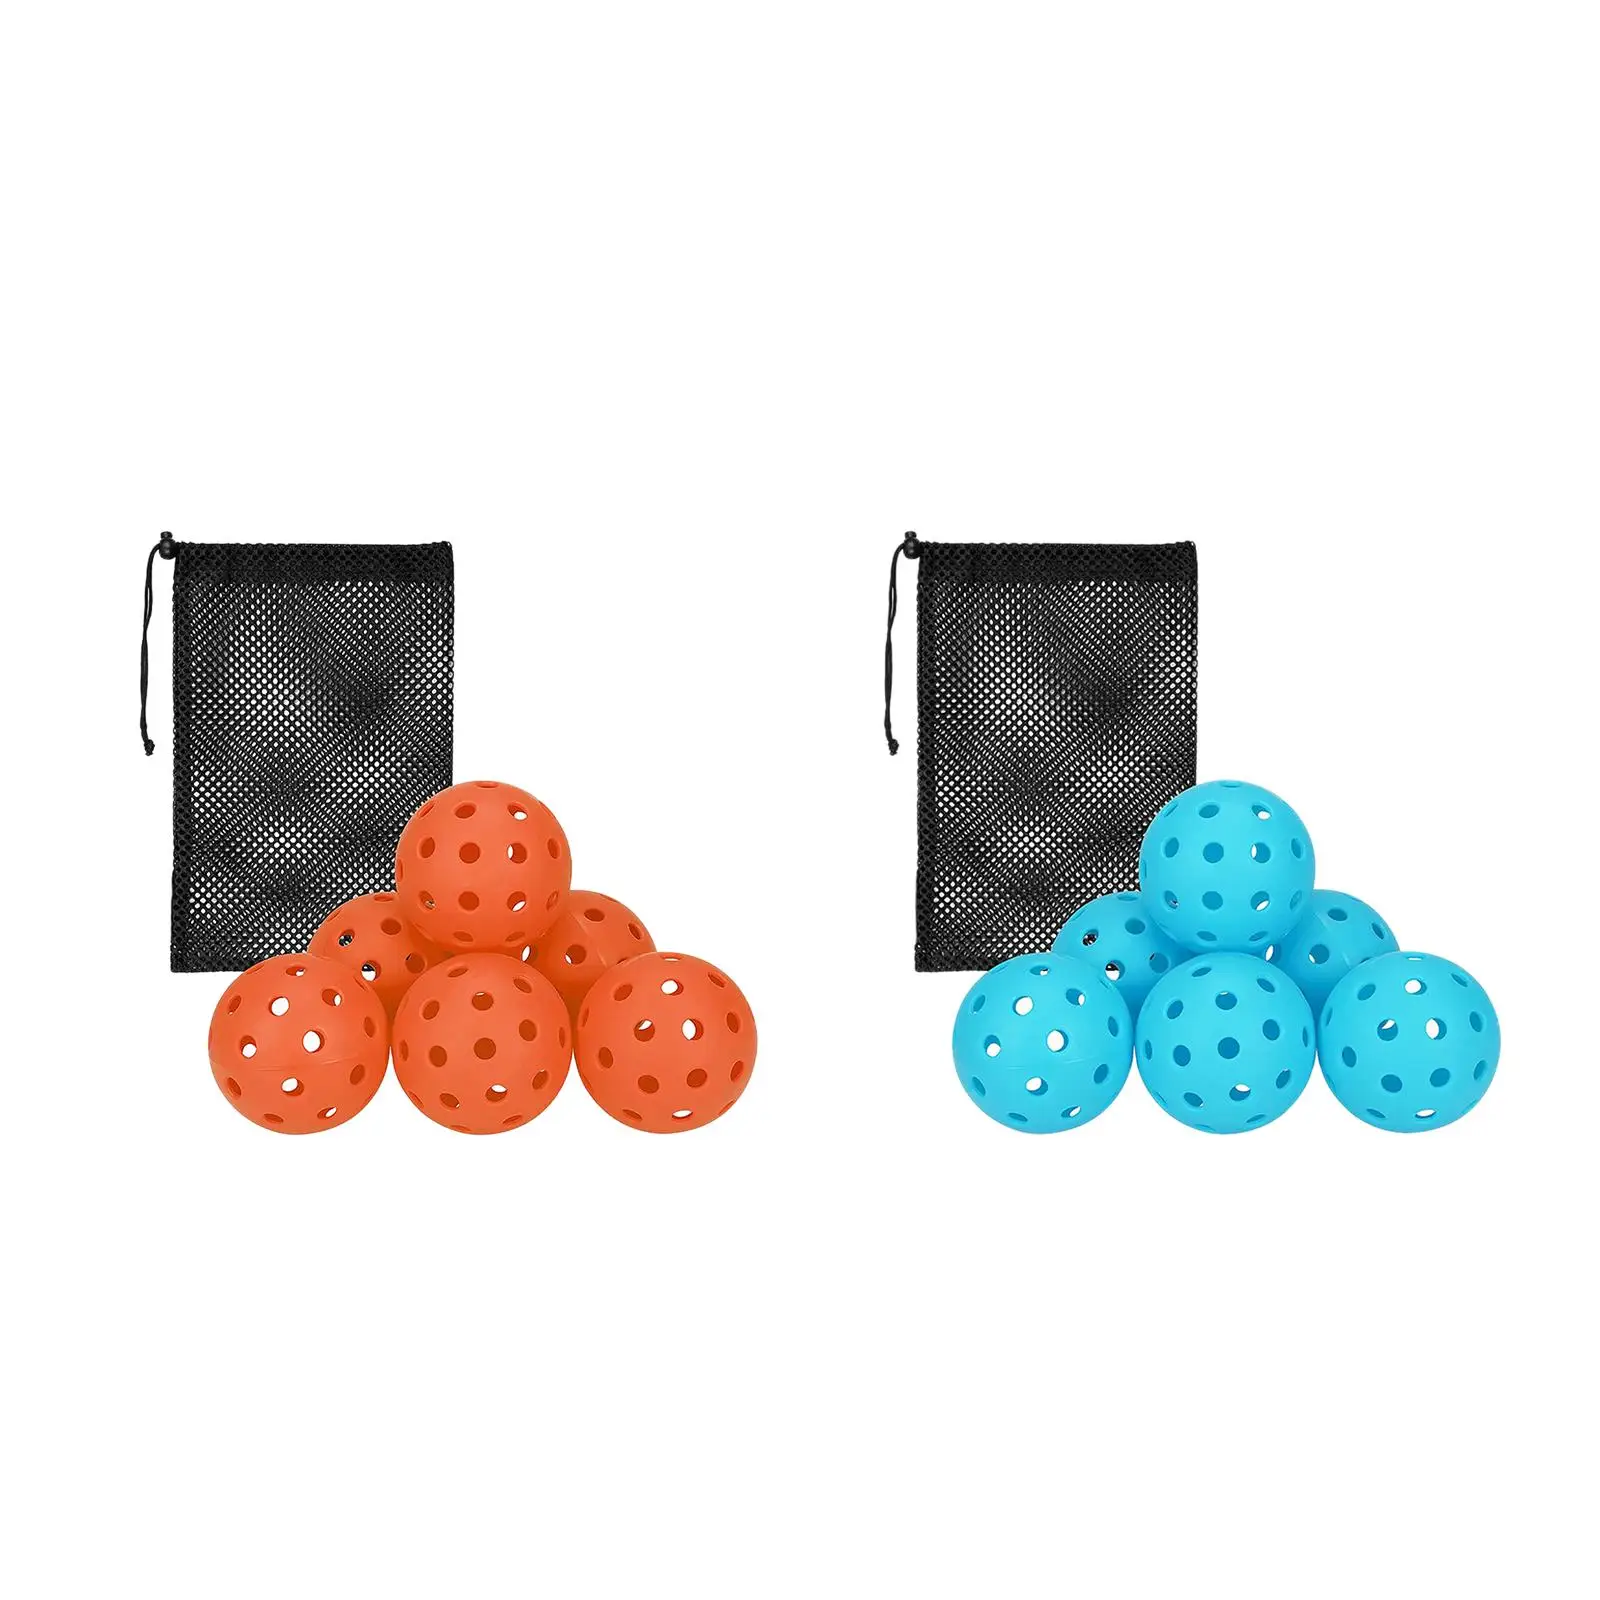 

6x 40 Holes Pickleball Balls Portable Golf Hollow Ball Pickle Balls for Training Practice Outdoor Sanctioned Tournament Play